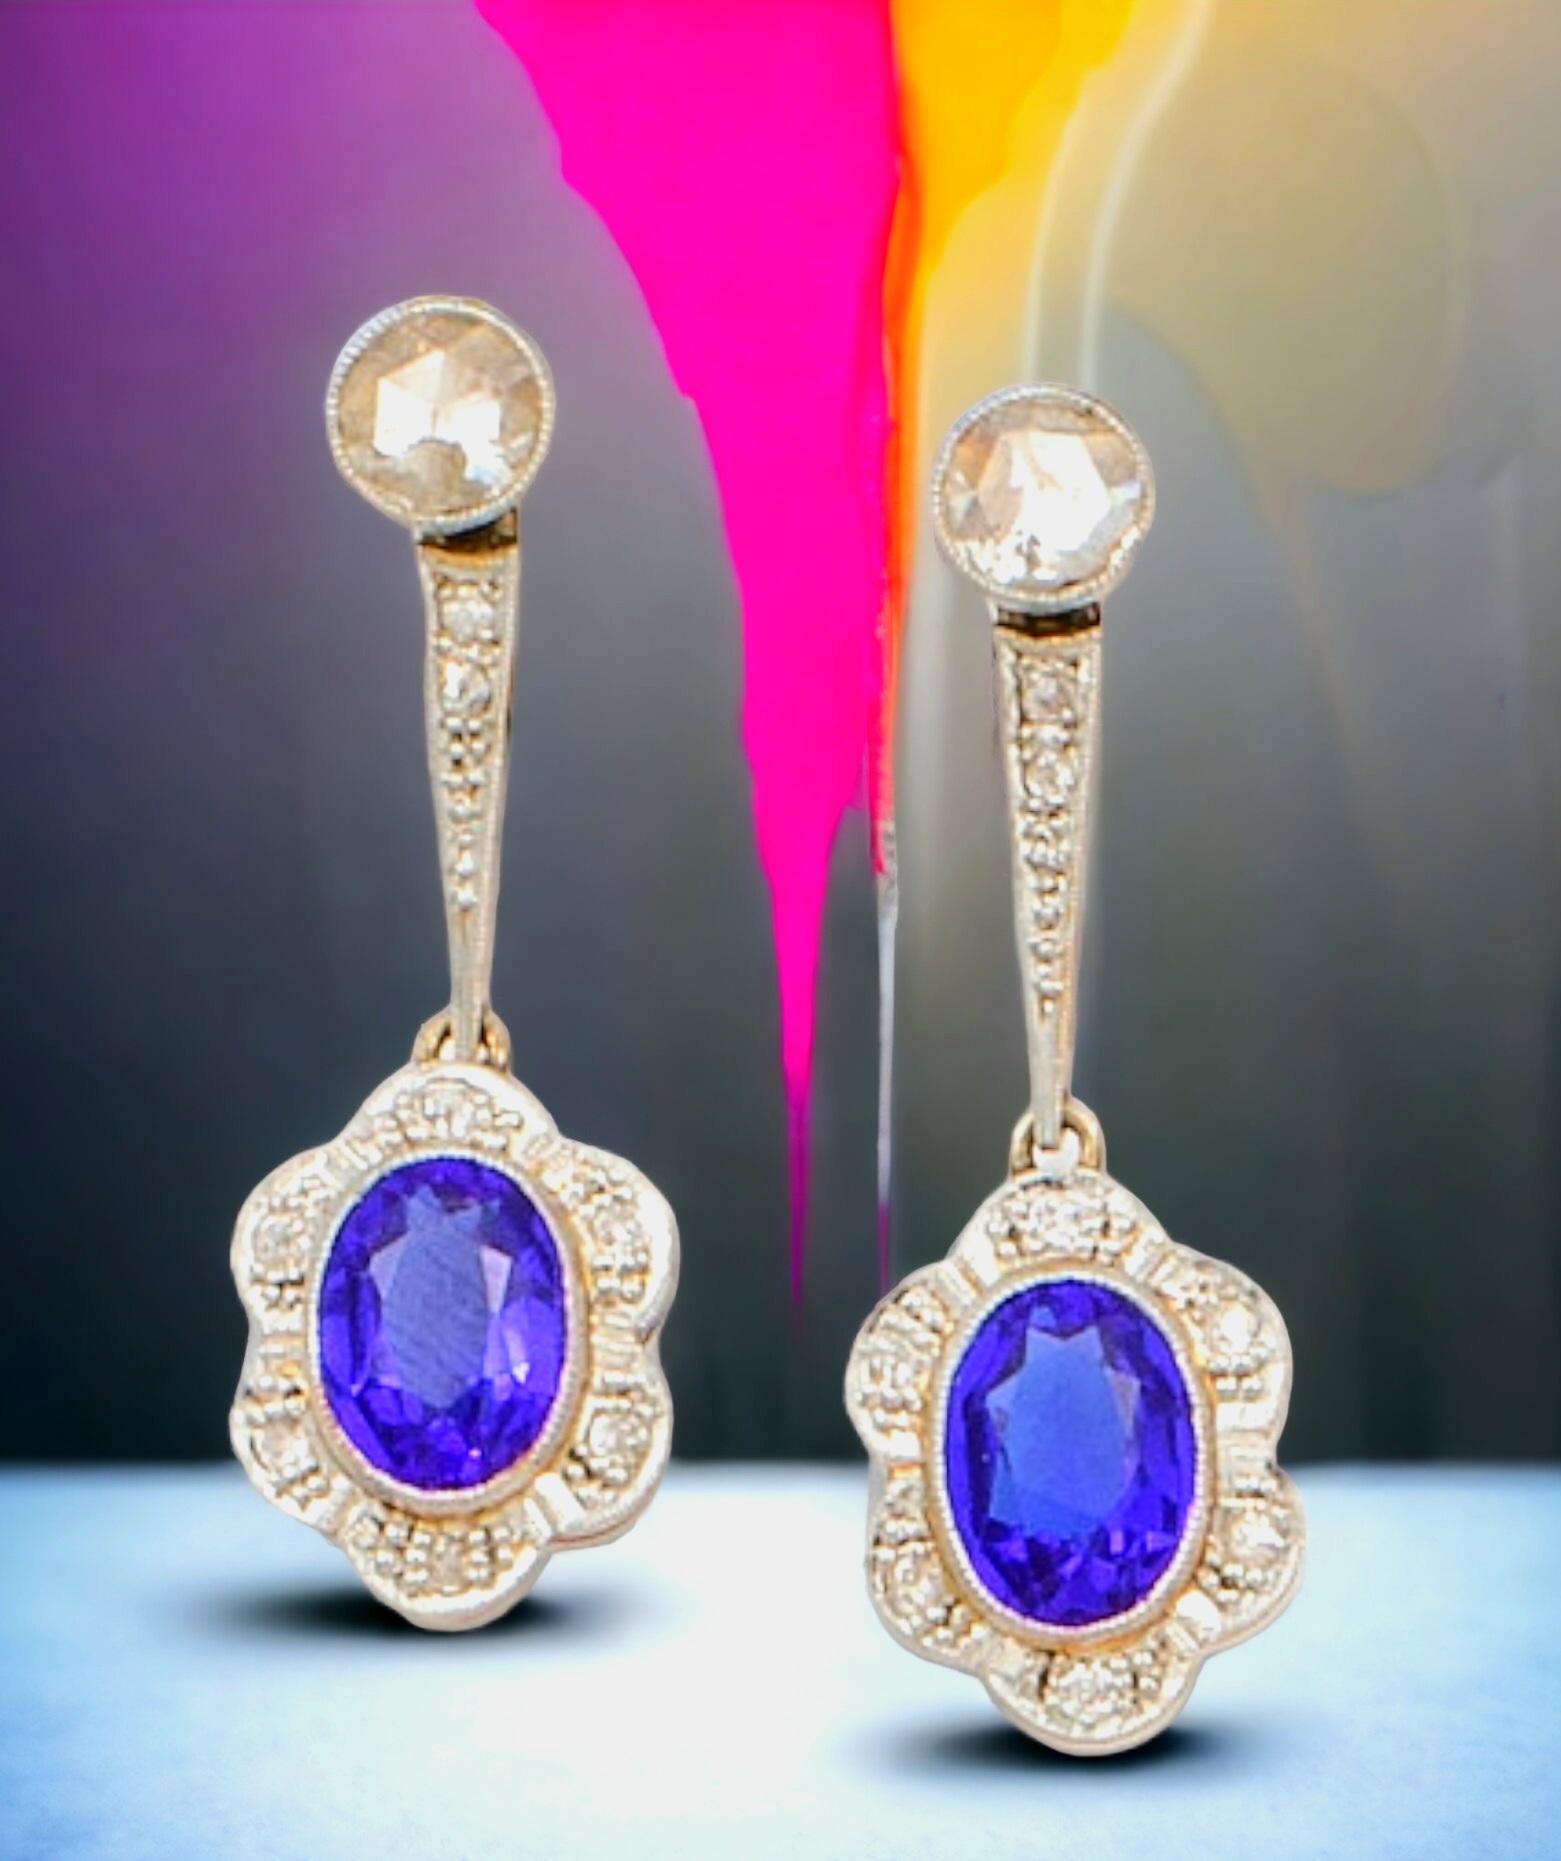 Art-Deco Synthetic Blue Sapphire and Diamond  Drop Earrings.
Each earring features a magnificent cobalt center stone, deep blue with ever-changing flashes of light and dark
These gorgeous  drop earrings feature a 3.00 carat central oval cut